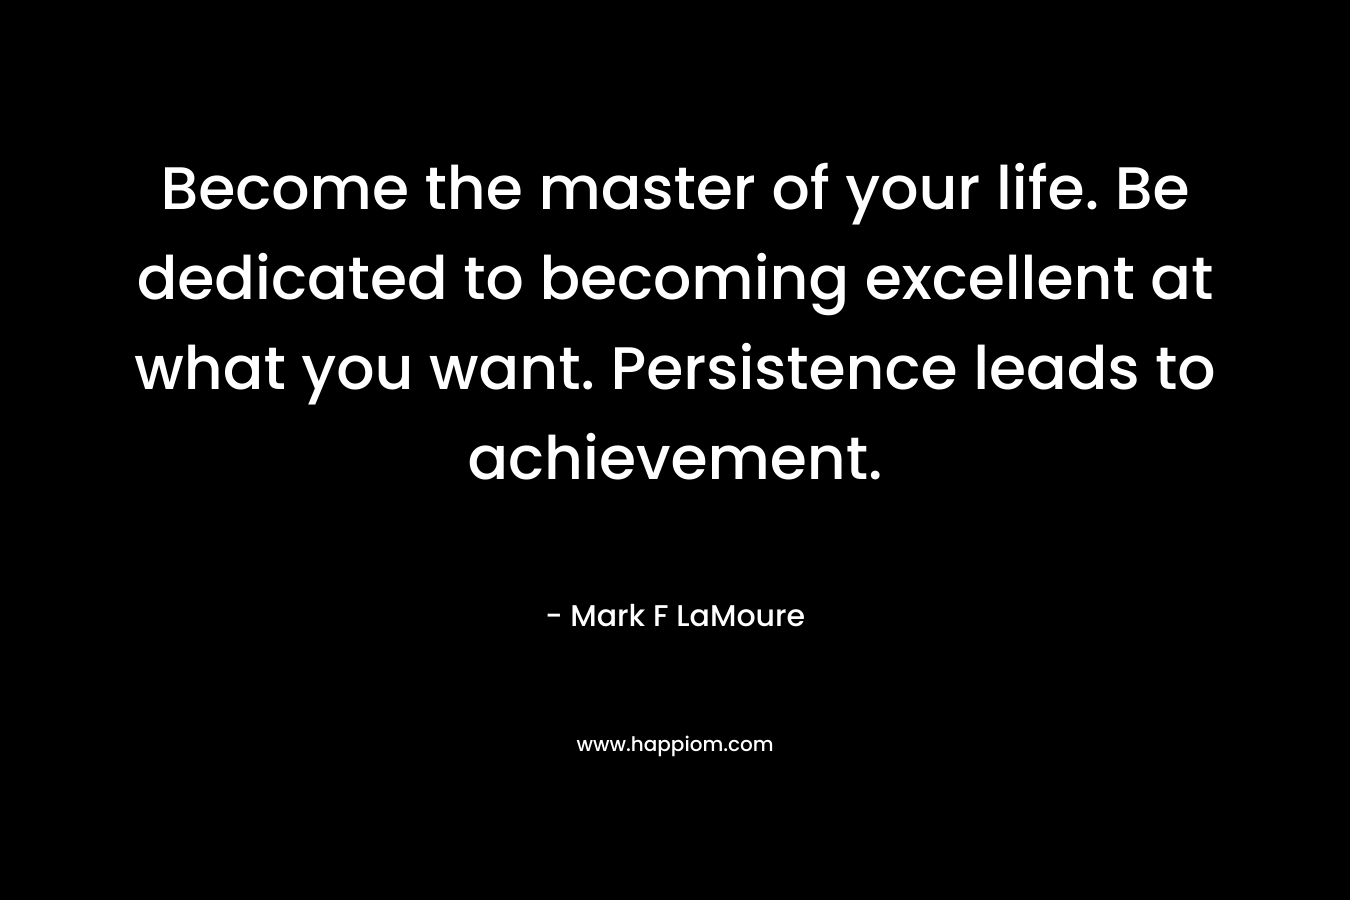 Become the master of your life. Be dedicated to becoming excellent at what you want. Persistence leads to achievement.